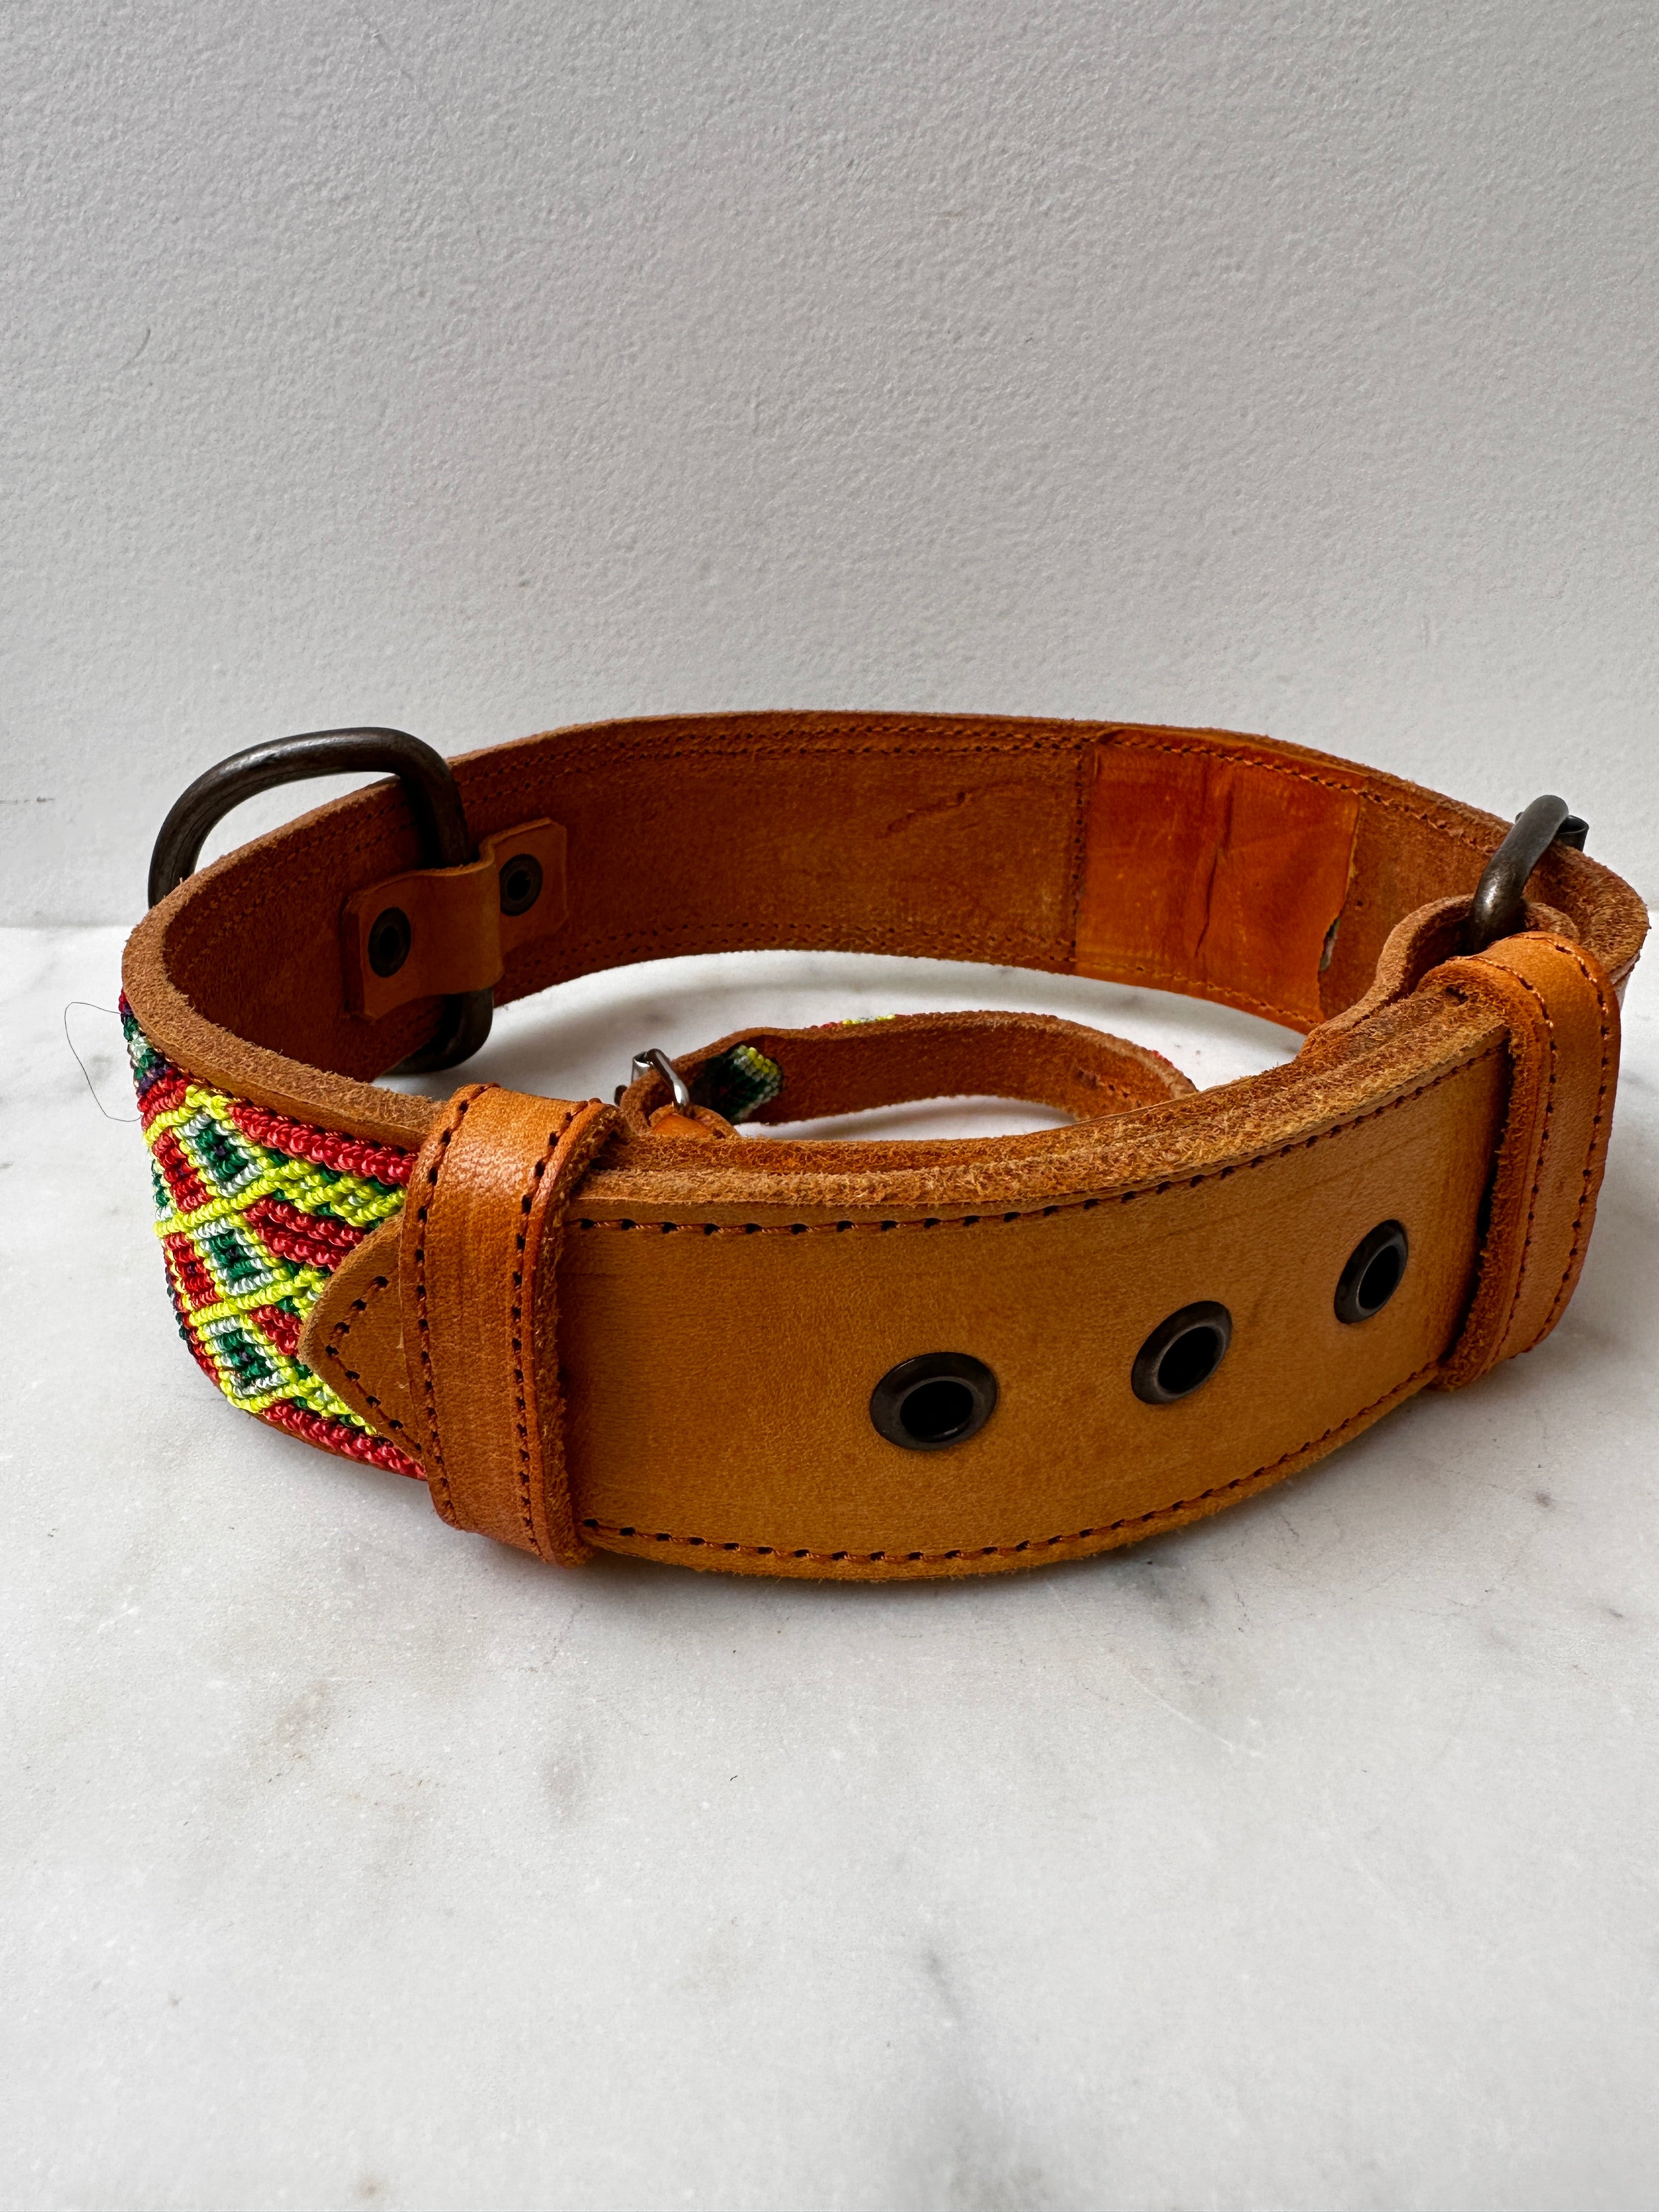 Future Nomads Homewares One Size Huichol Leather Wide Dog Collar L8